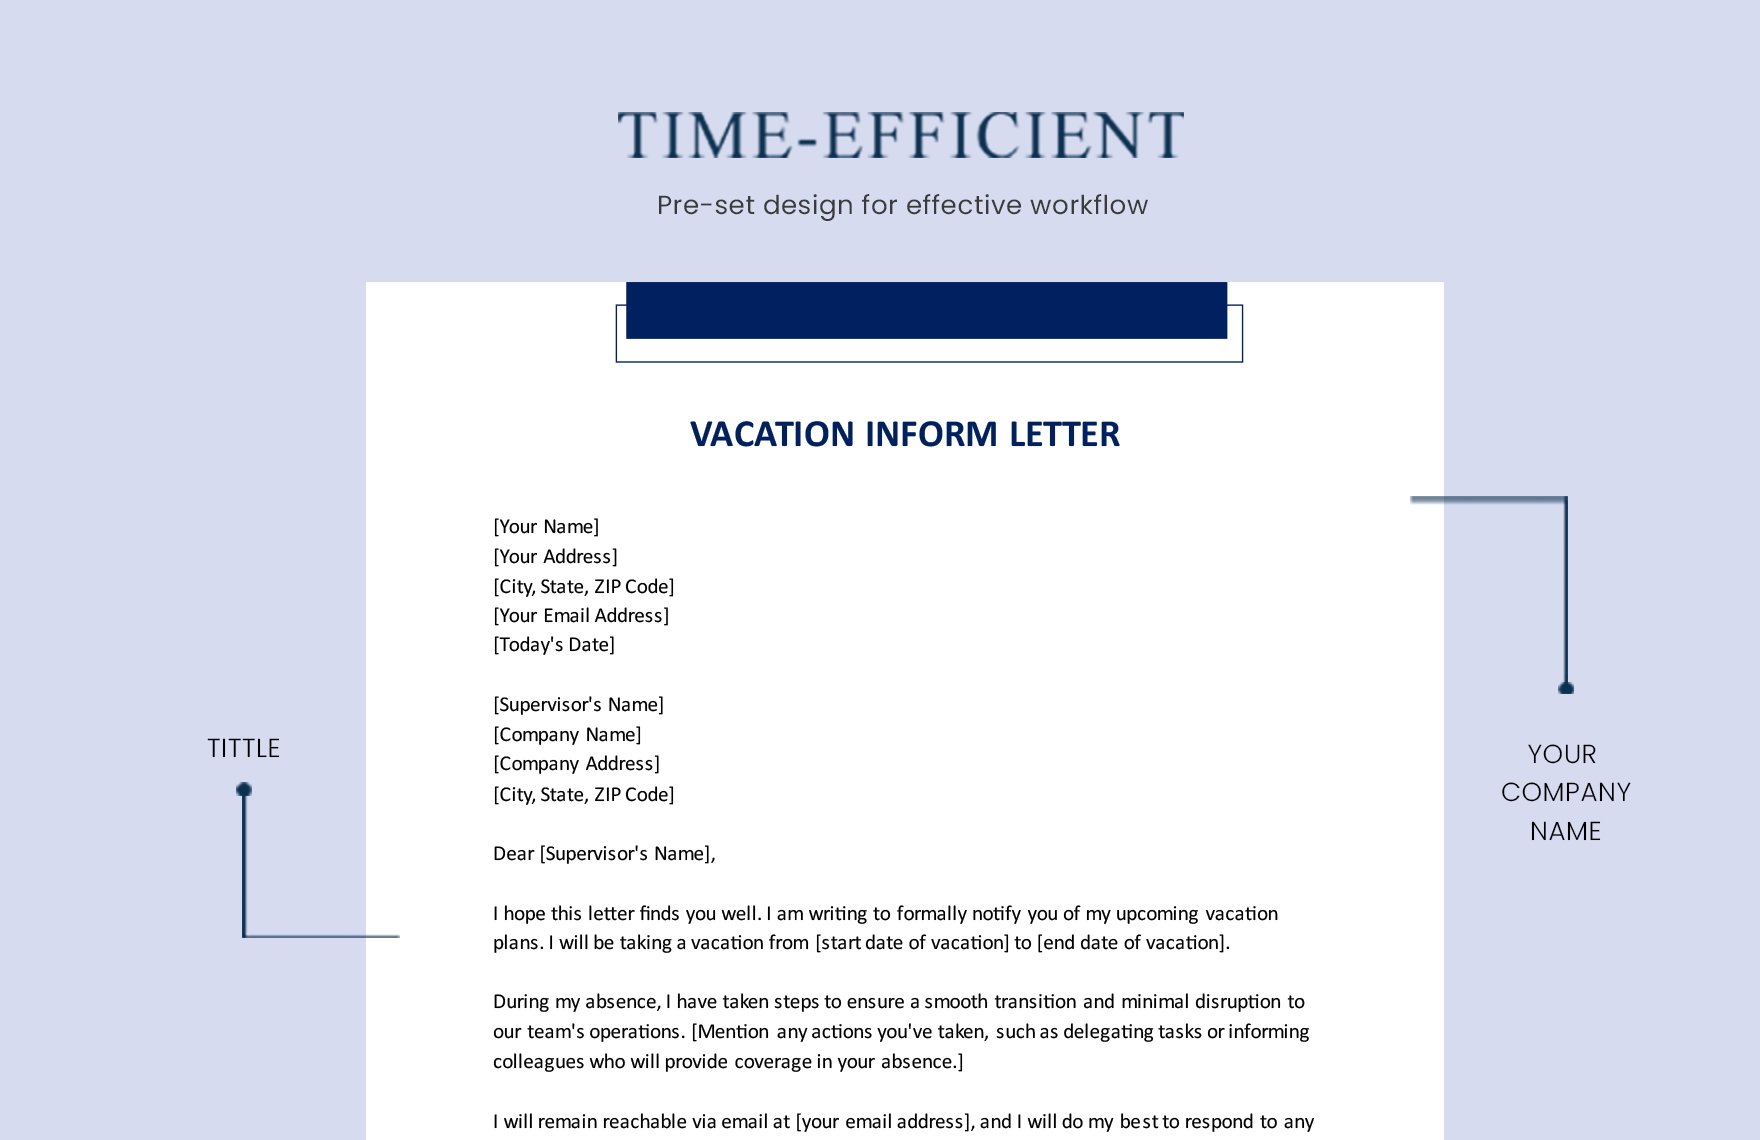 Vacation Inform Letter